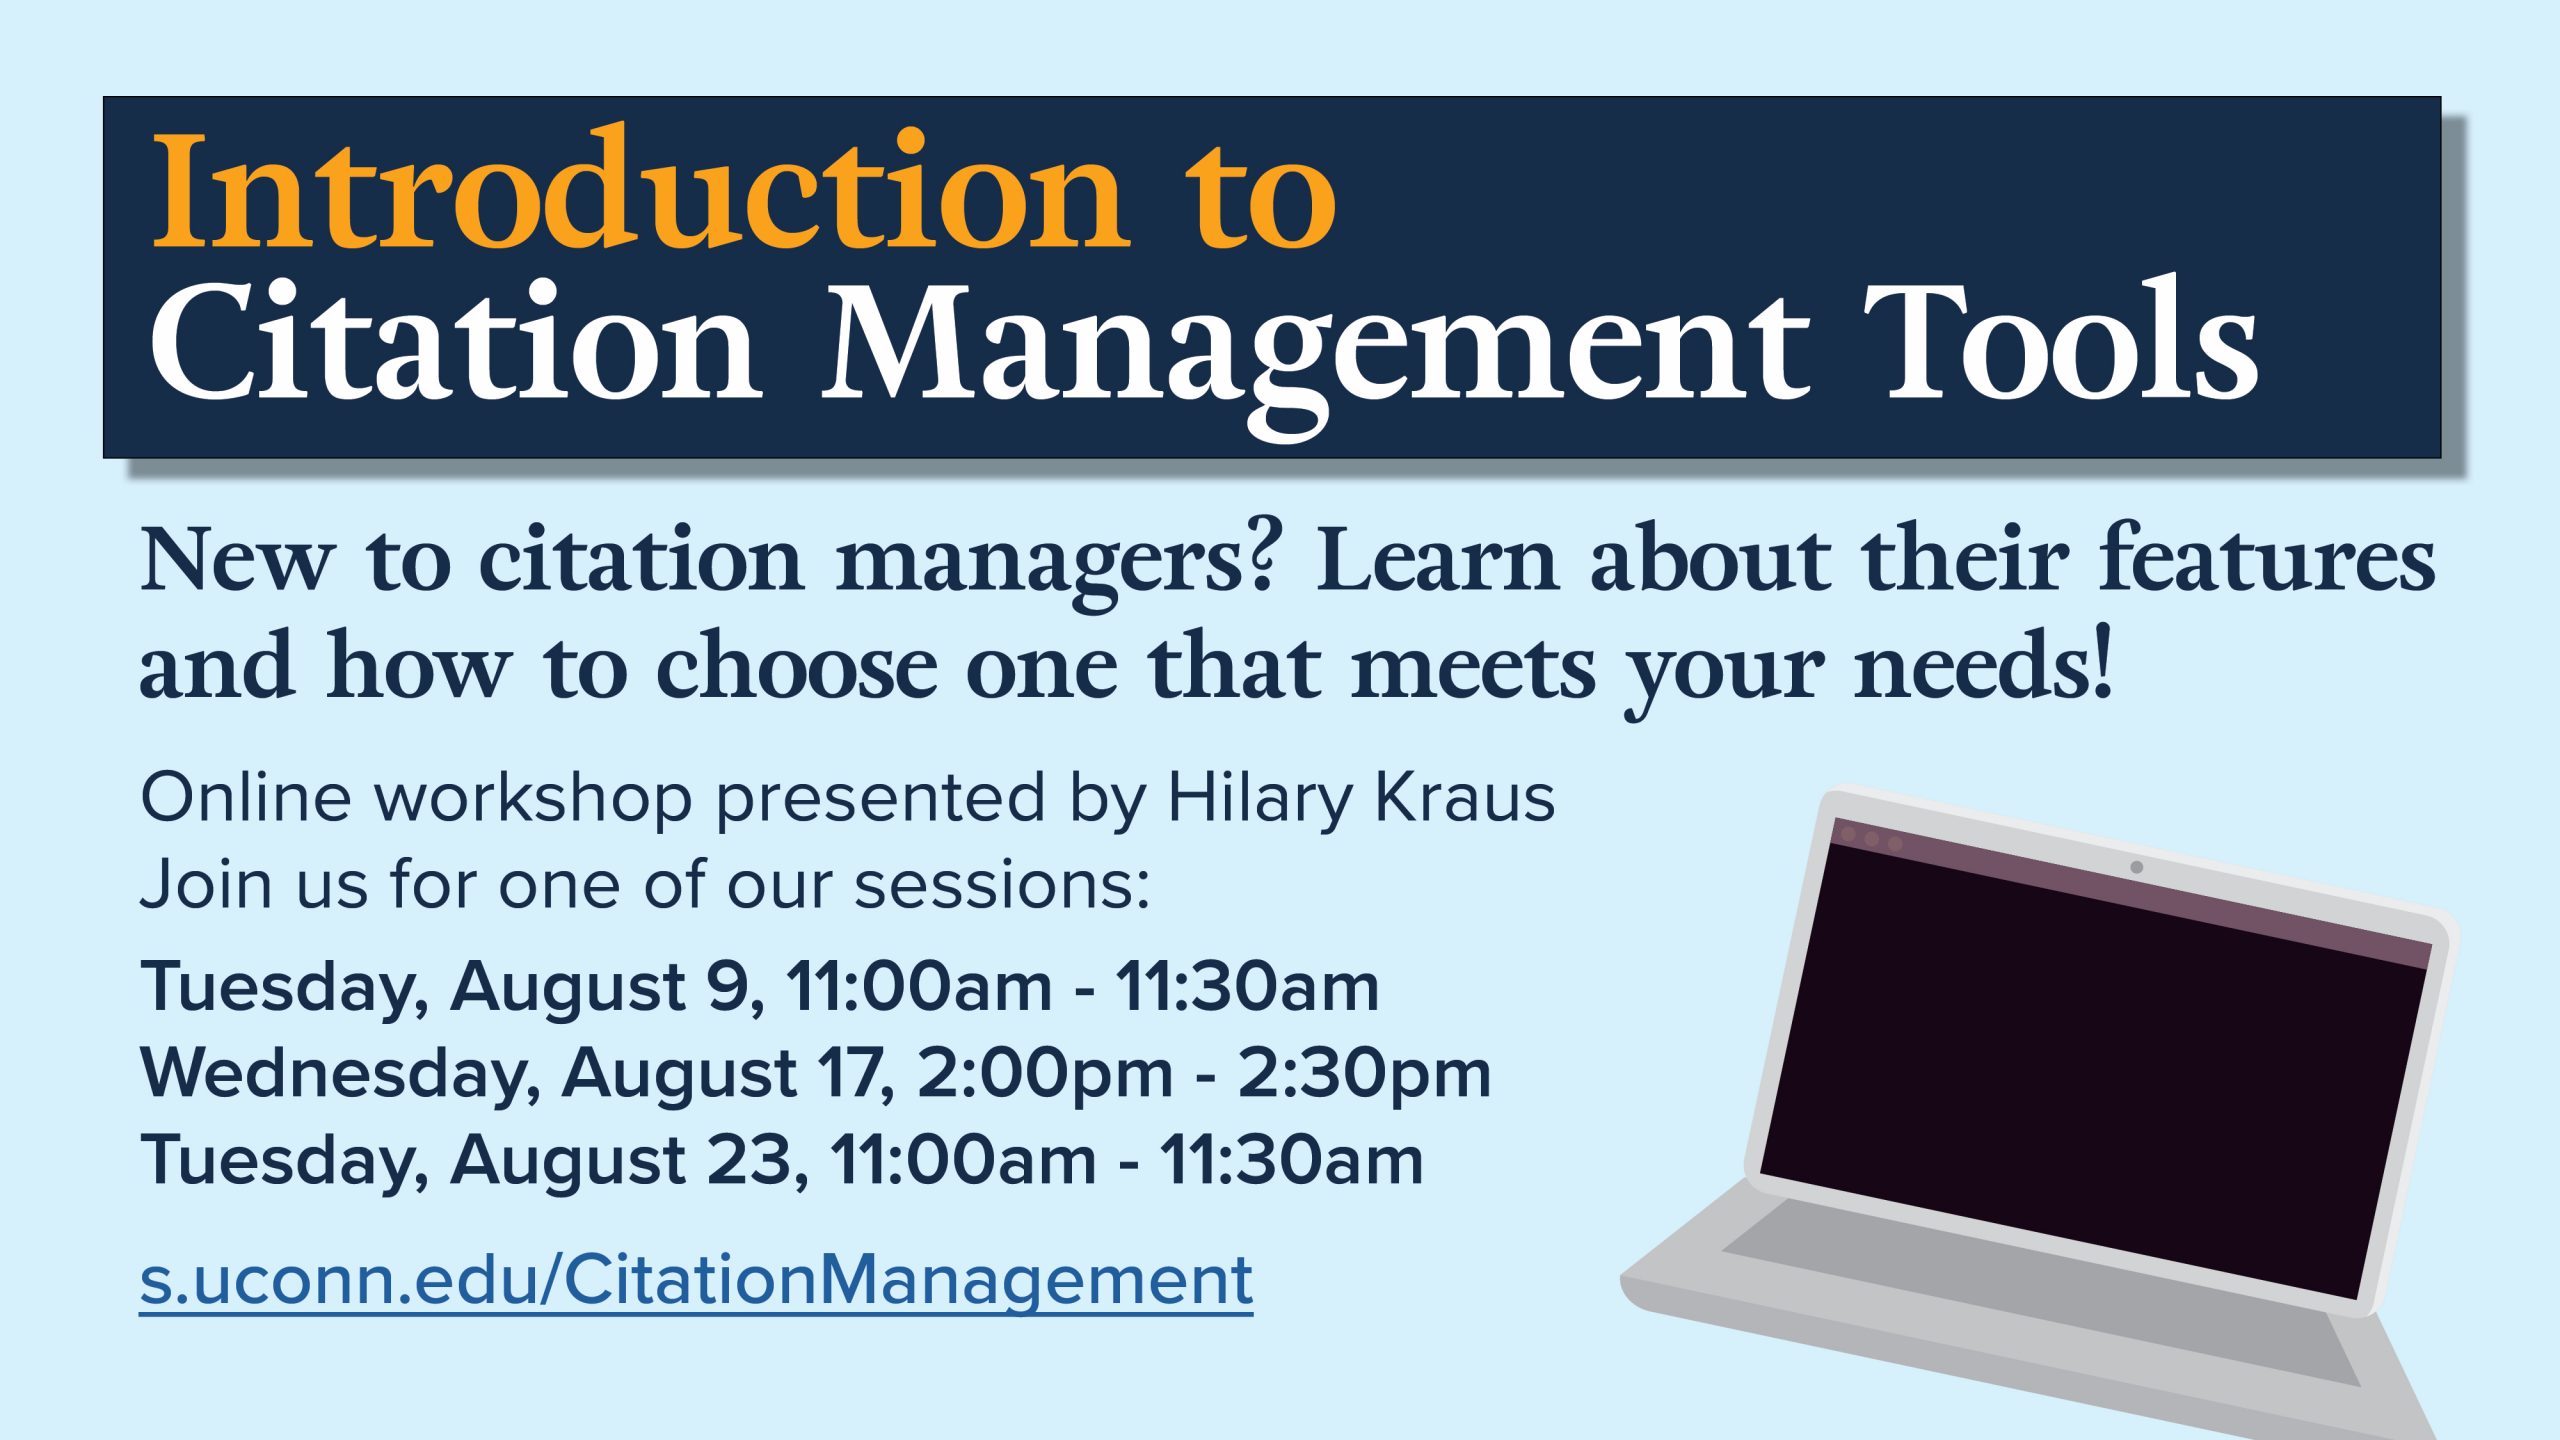 Marketing image with a graphic of a laptop computer and the text: Introduction to Citation Management Tools, New to citation managers? Learn about their features and how to choose one that meets your needs! Online workshop presented by Hilary Kraus Join us for one of our sessions: Tuesday, August 9, 11:00am - 11:30am Wednesday, August 17, 2:00pm - 2:30pm Tuesday, August 23, 11:00am - 11:30am s.uconn.edu/CitationManagement